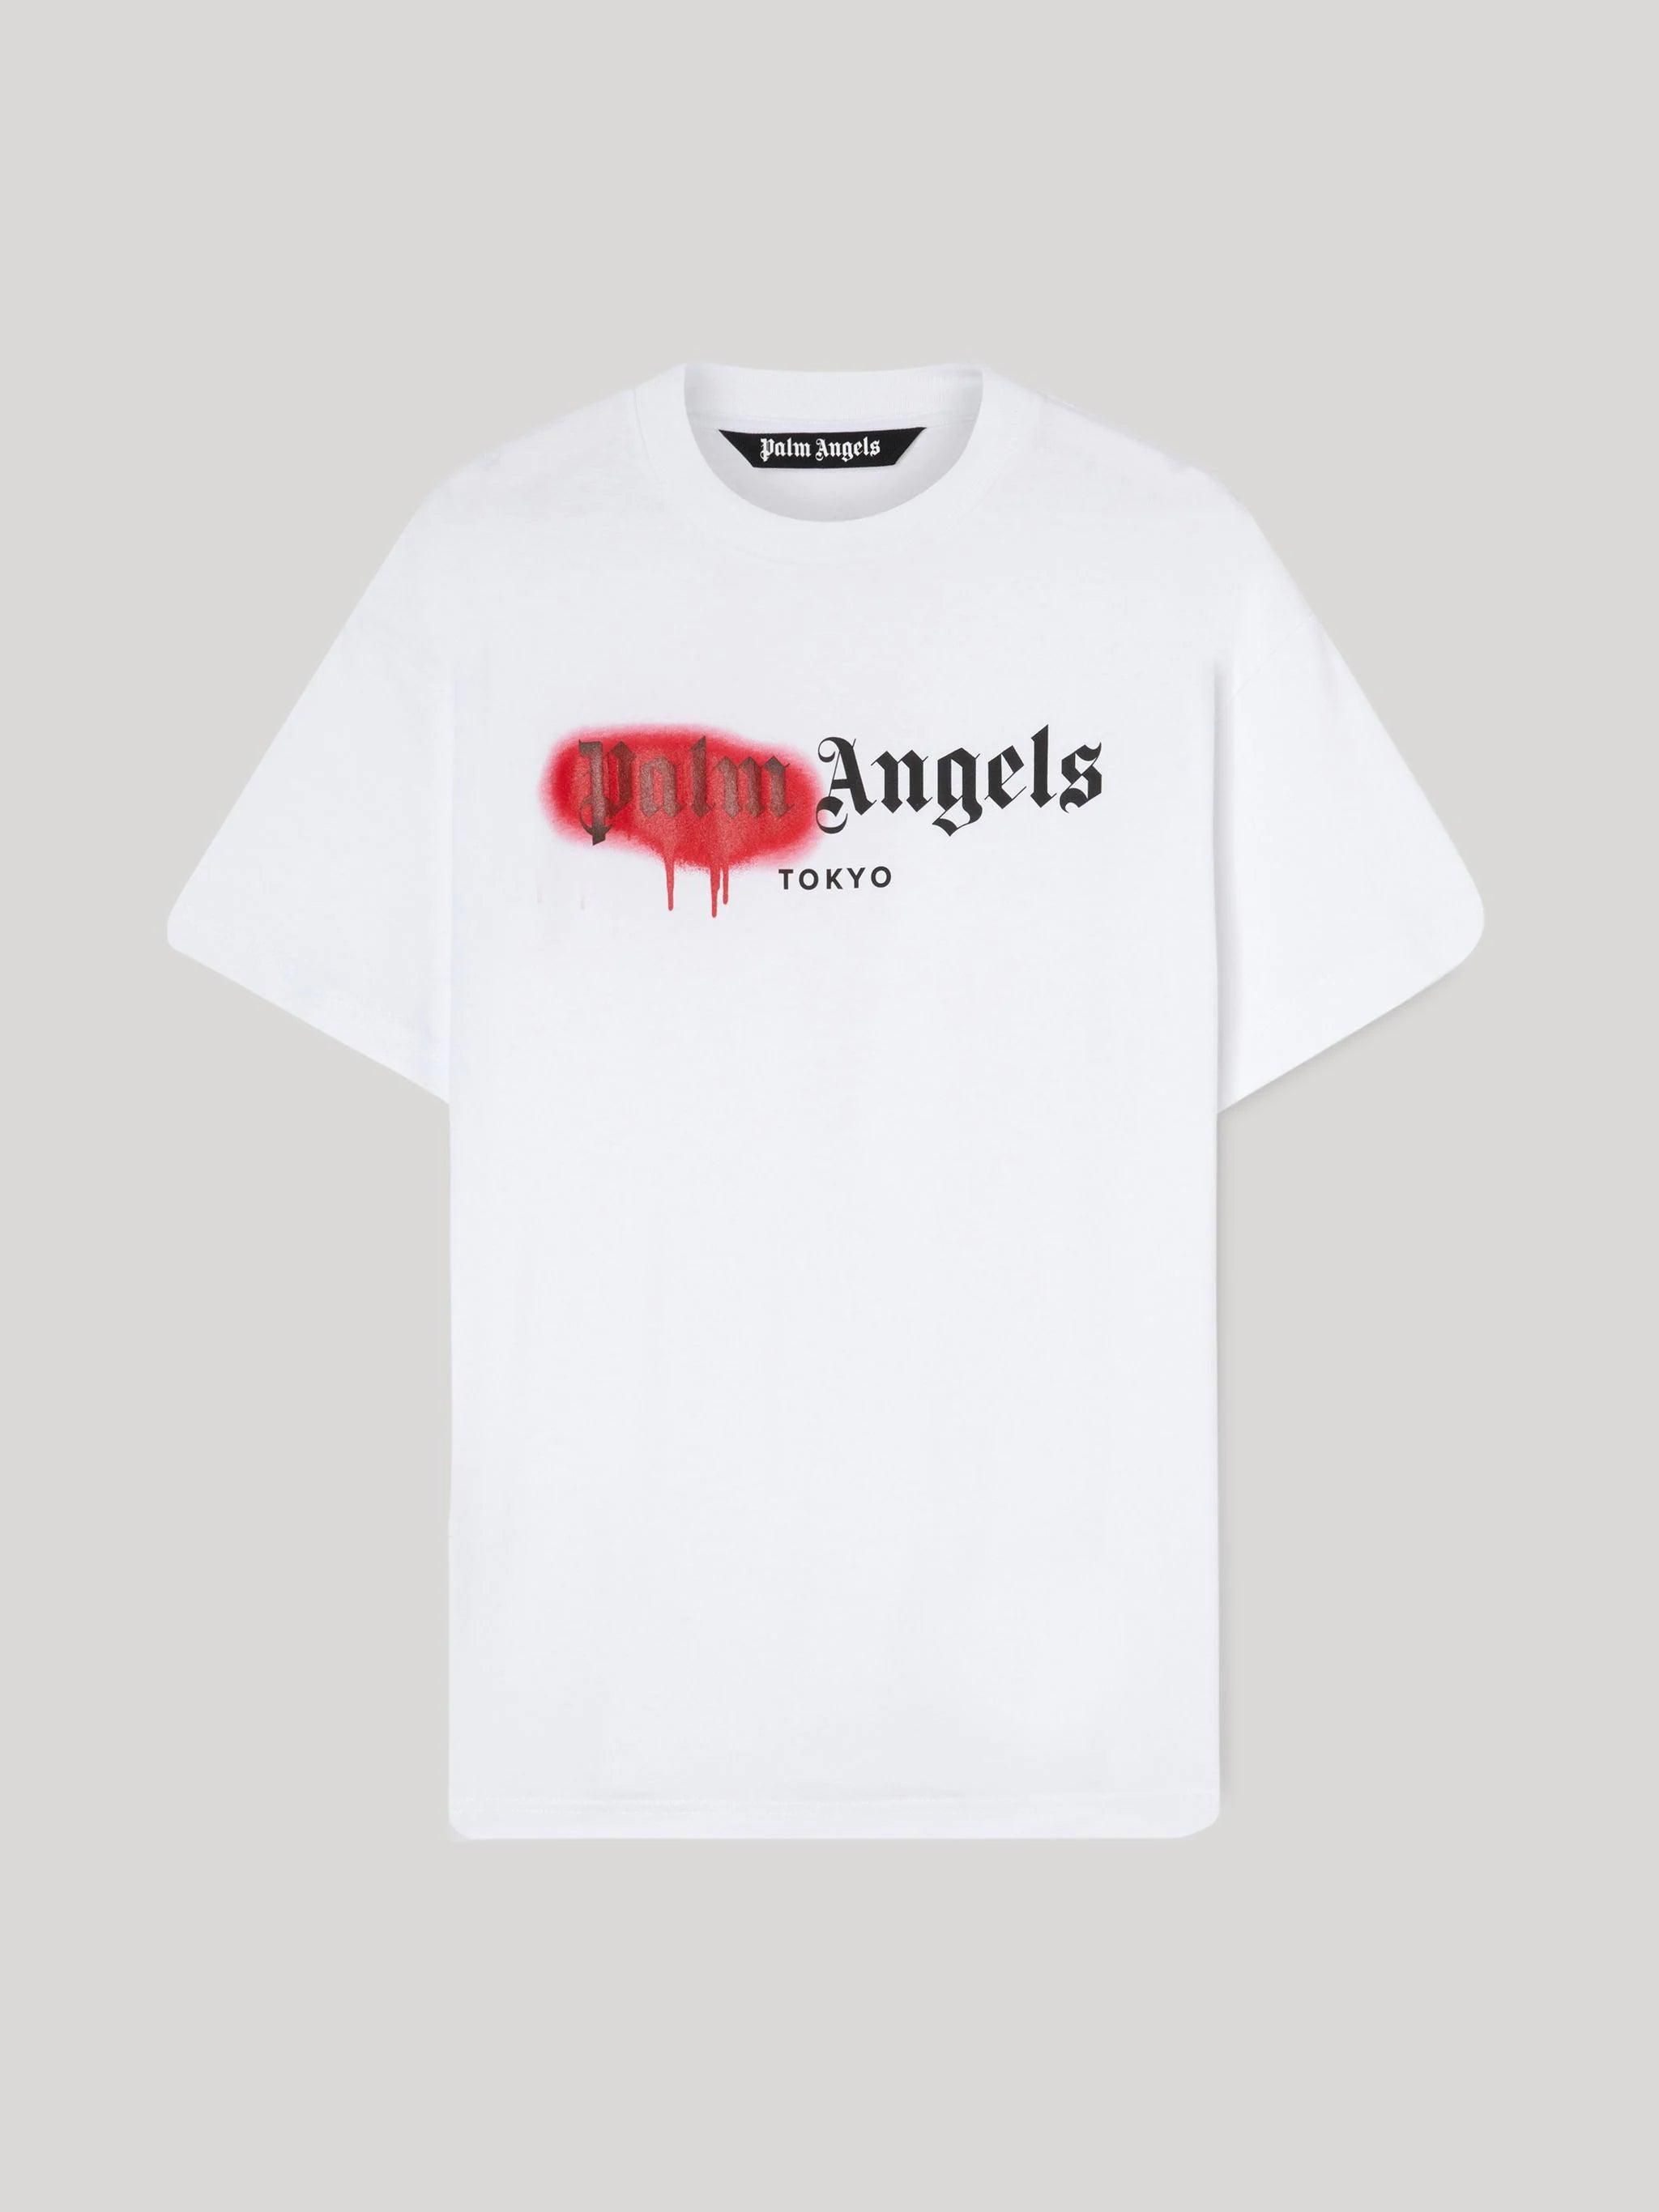 Palm Angels White Red 